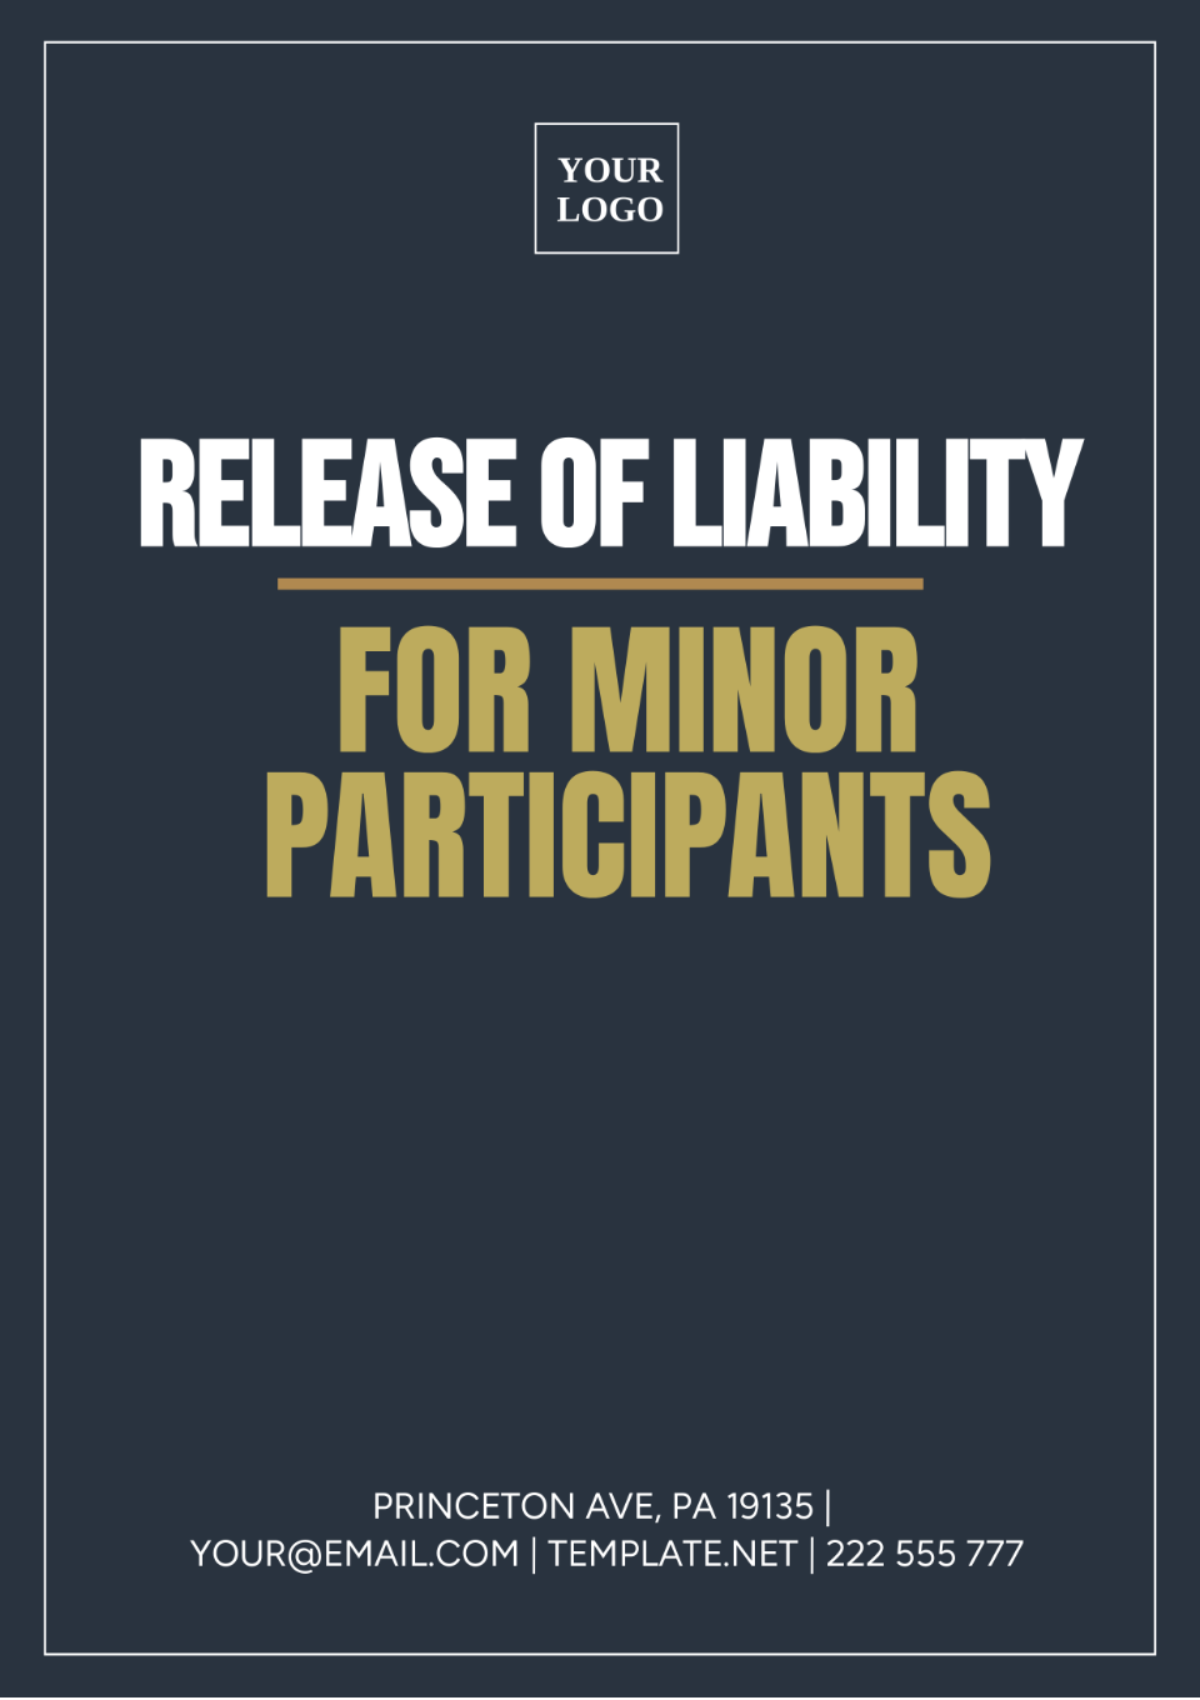 Release of Liability for Minor Participants Template